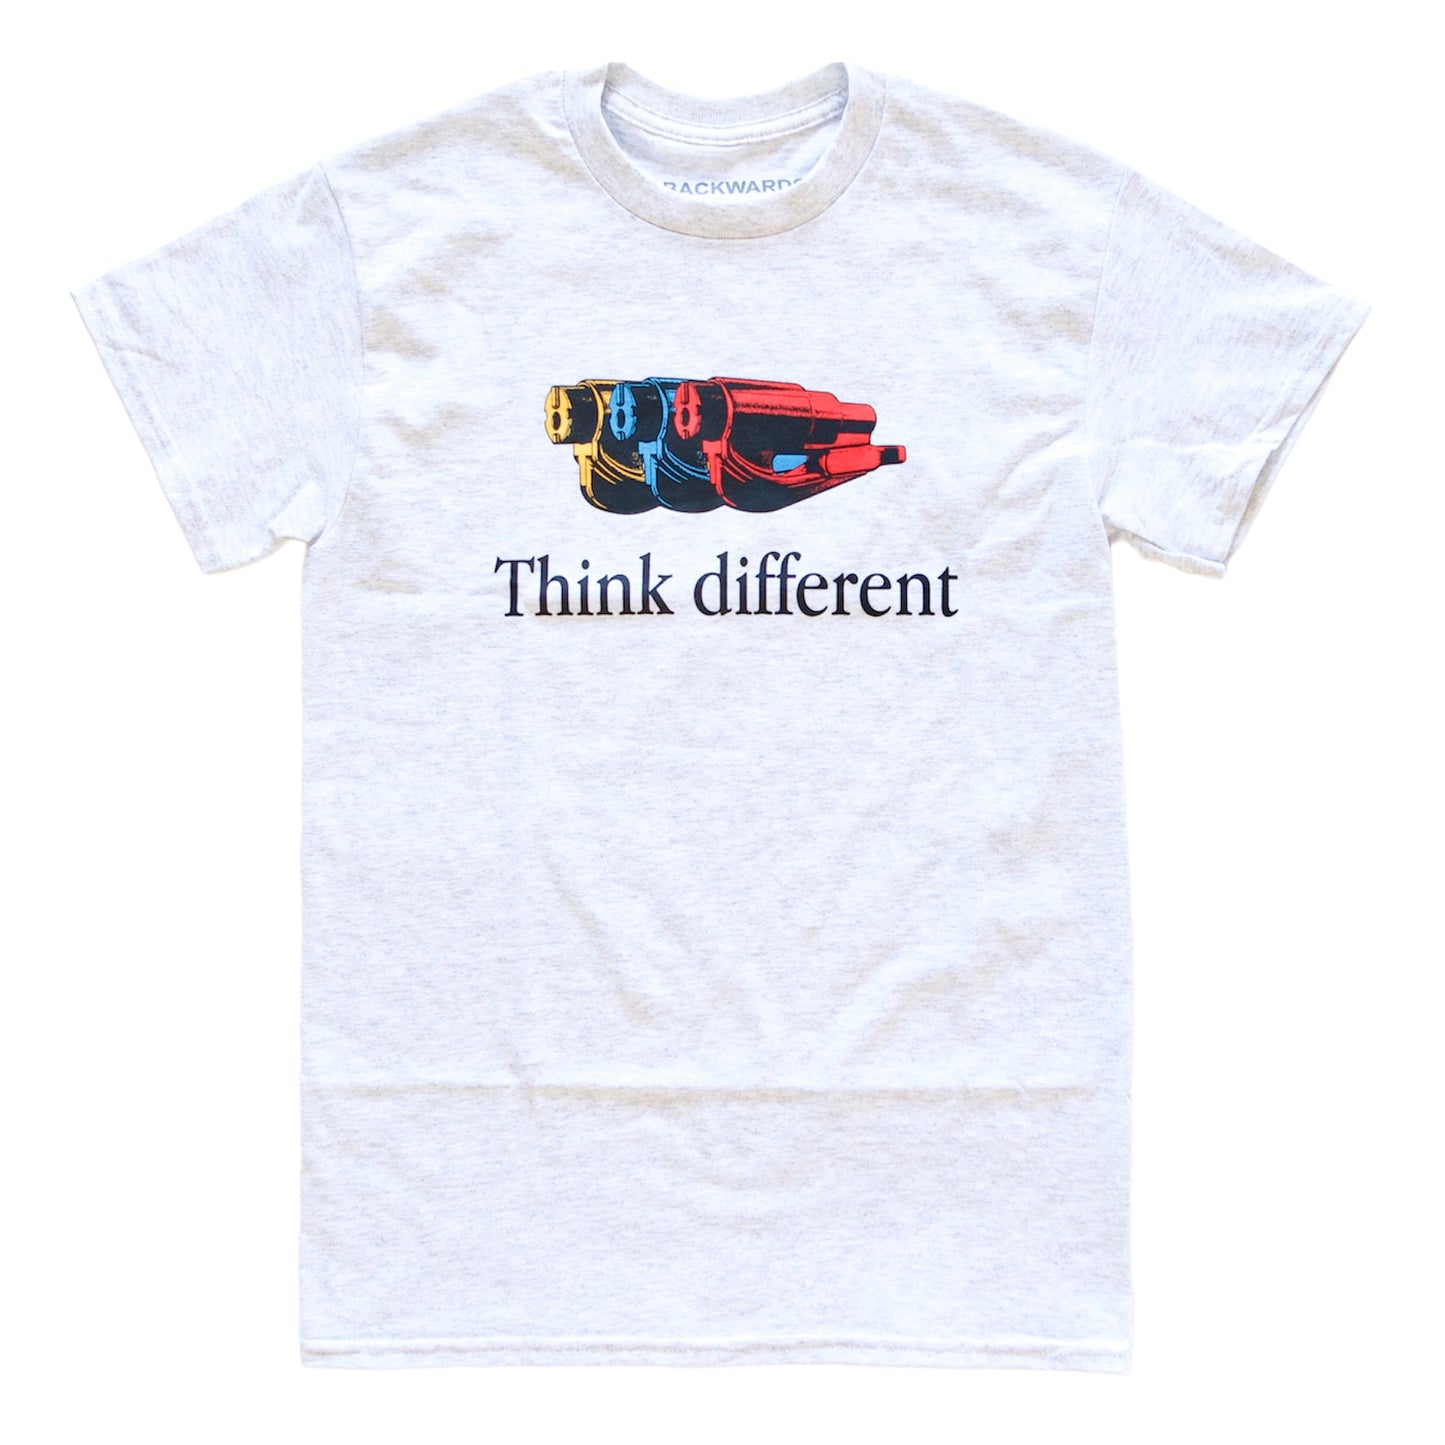 Ash Gray “Think Different” T-Shirt